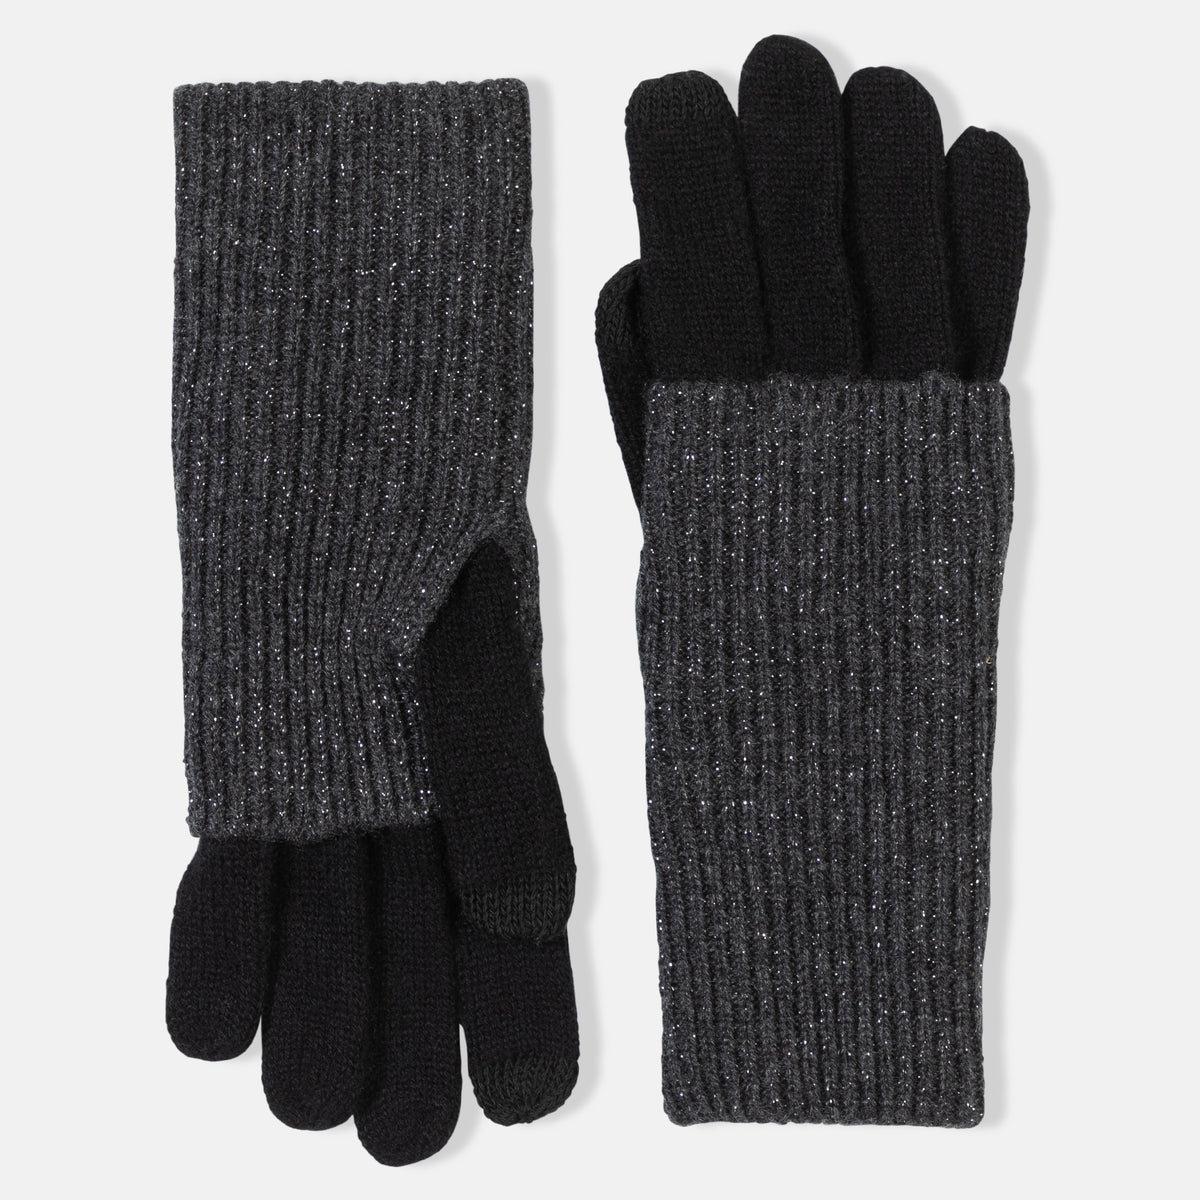 Picture of knitted cashmere gloves with foldover contrast sparkle cuff in cream and grey.